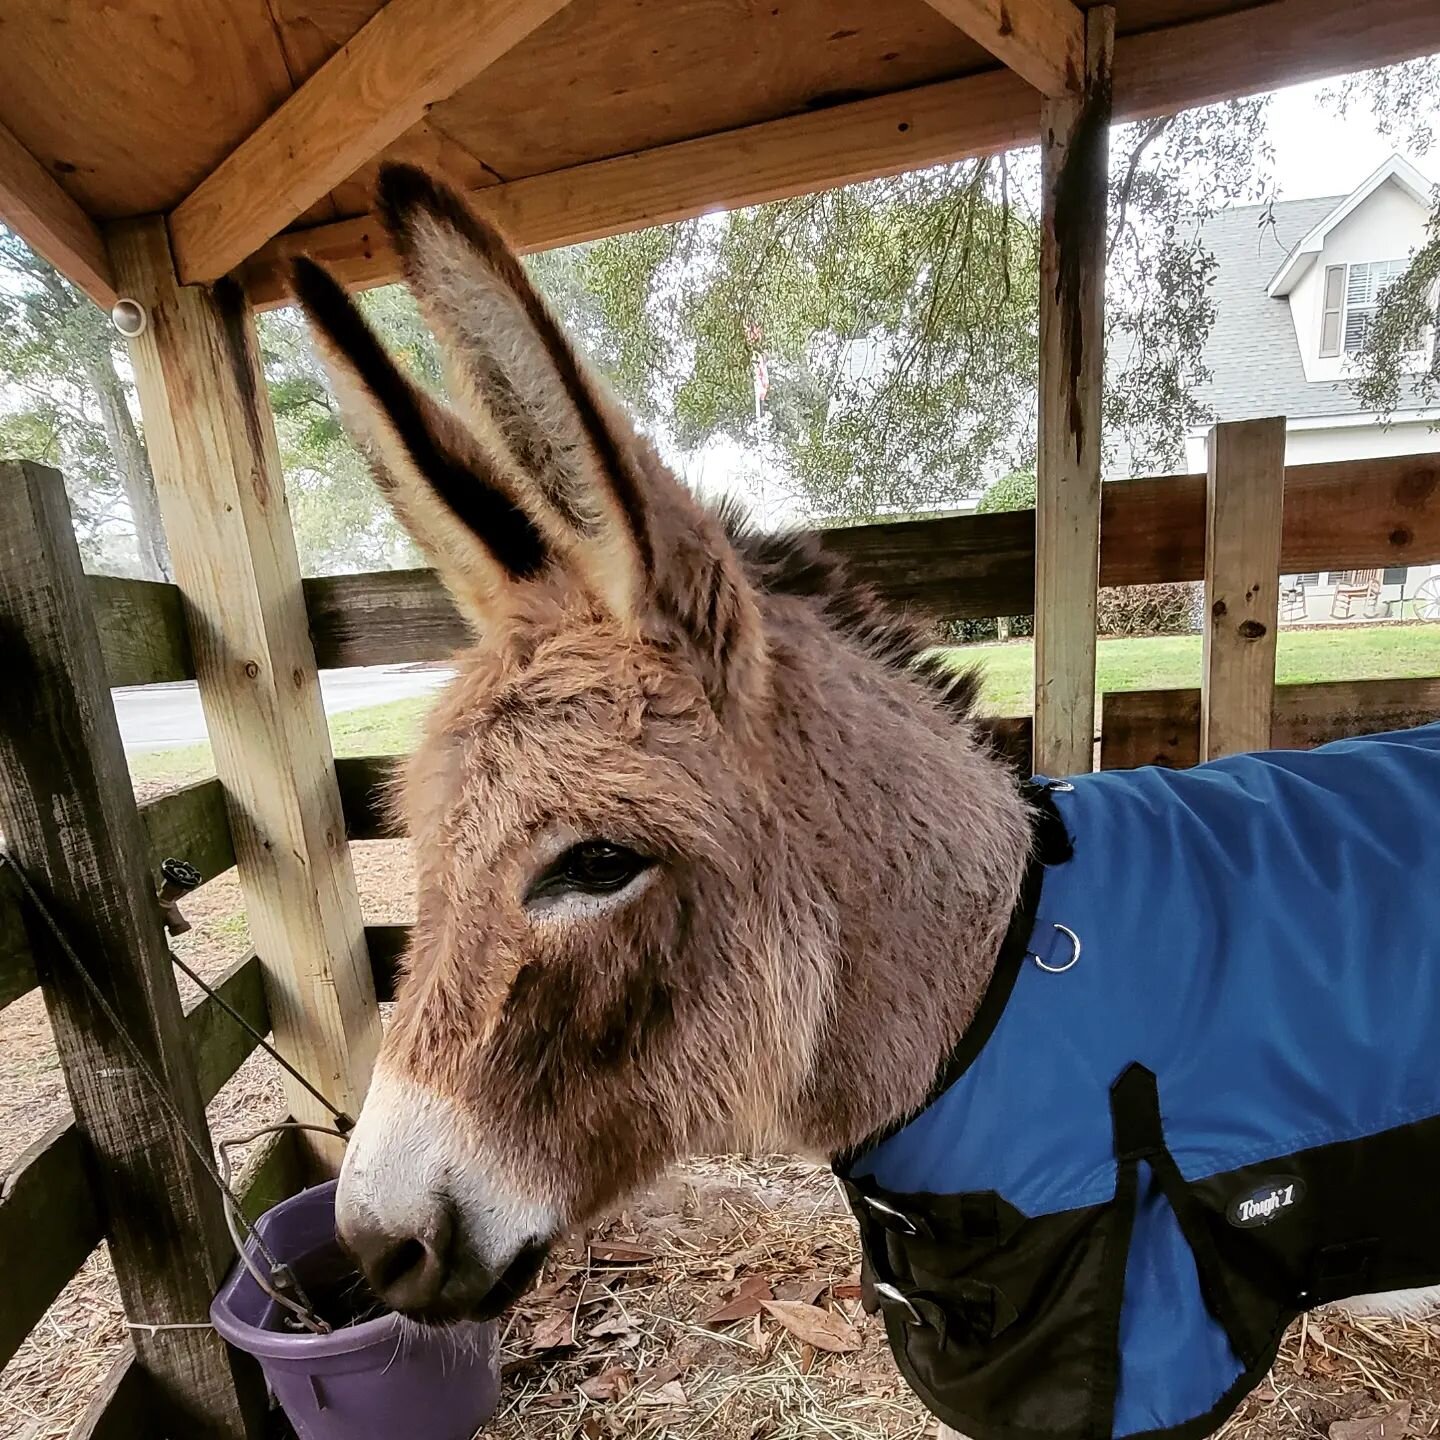 With this little blanket and some hugs he'll get through these cold nights. #TwoGroomsFarm #donkey  #farm